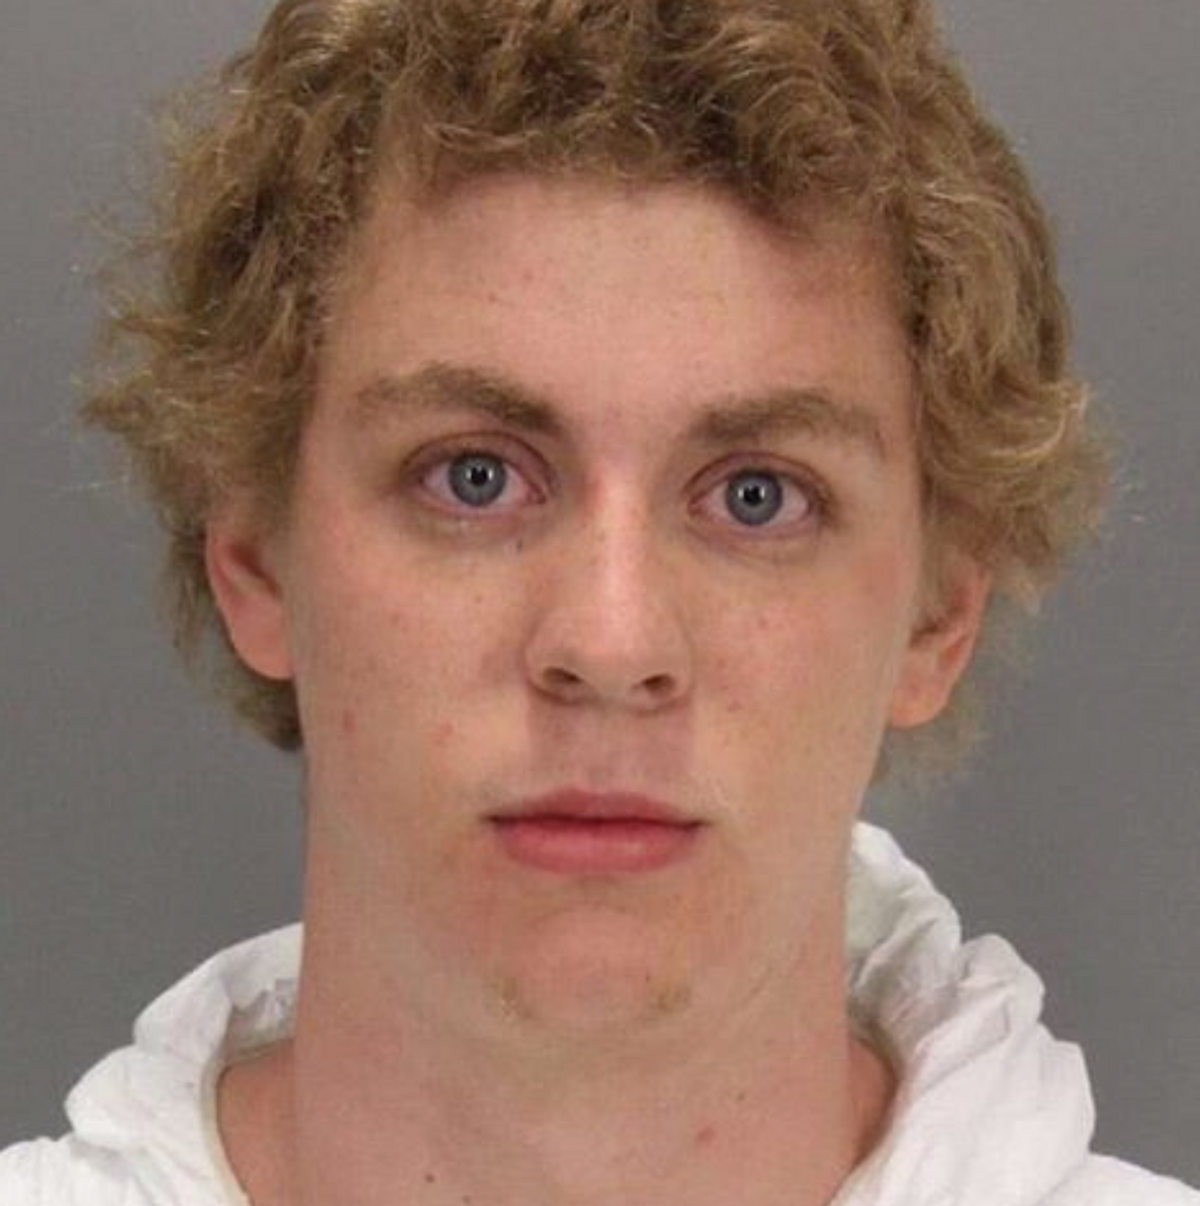 5 Offenses That Will Land You In Jail For Longer Than Brock Turner